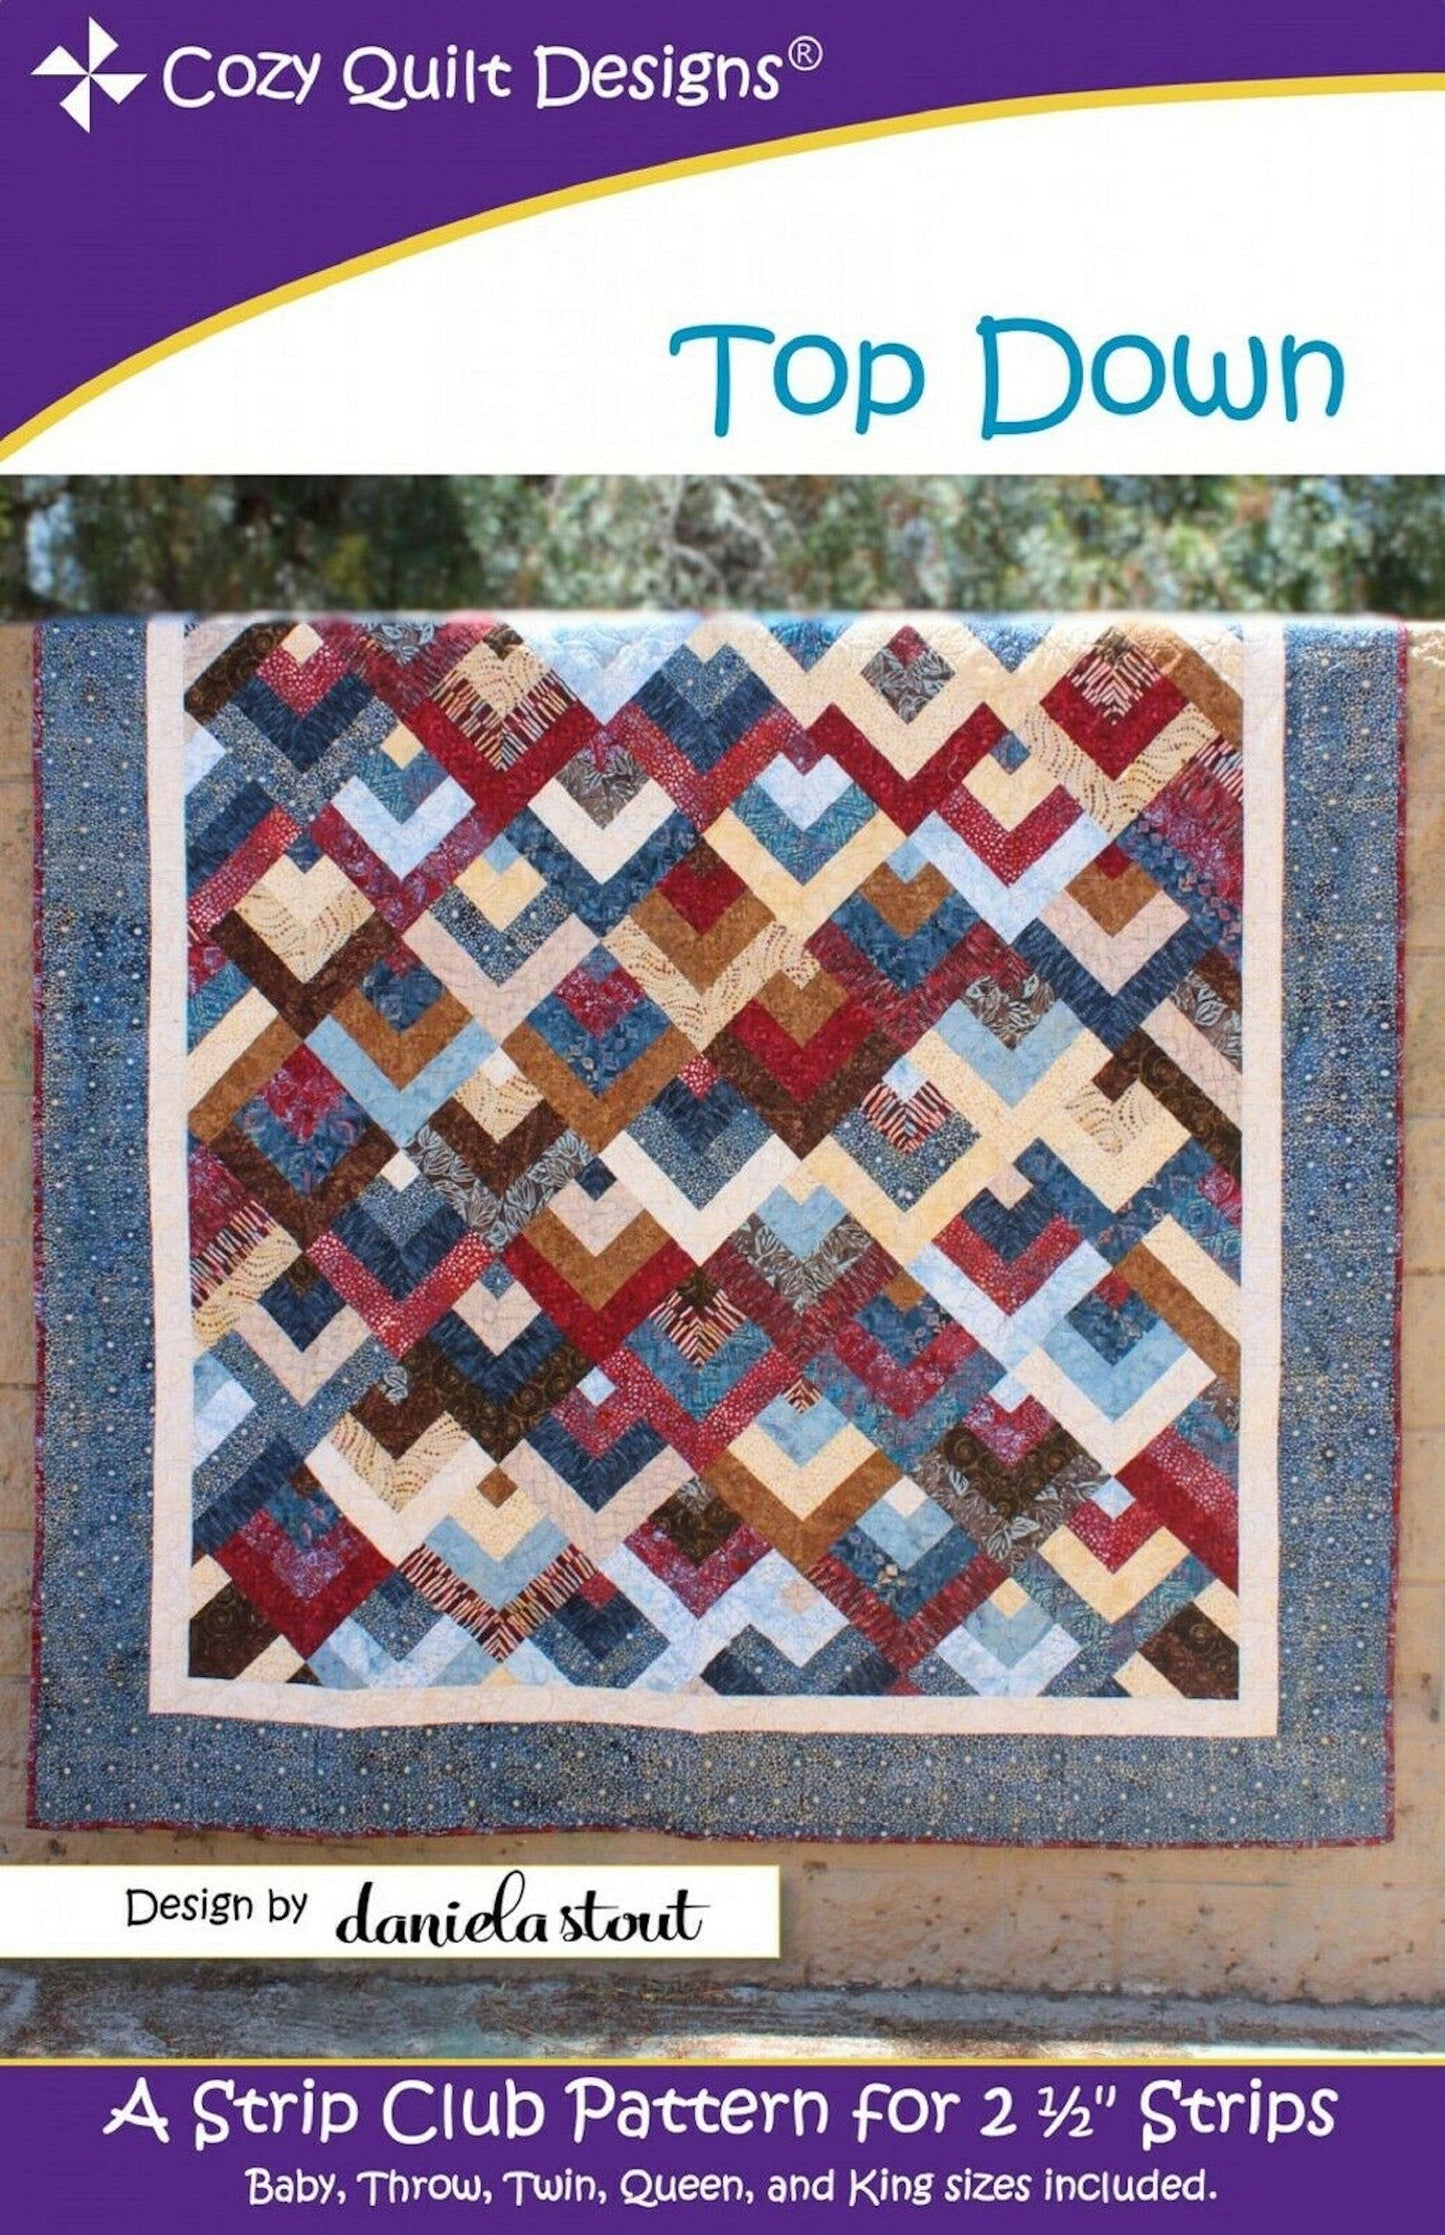 Top Down Quilt Pattern by Cozy Quilt Designs